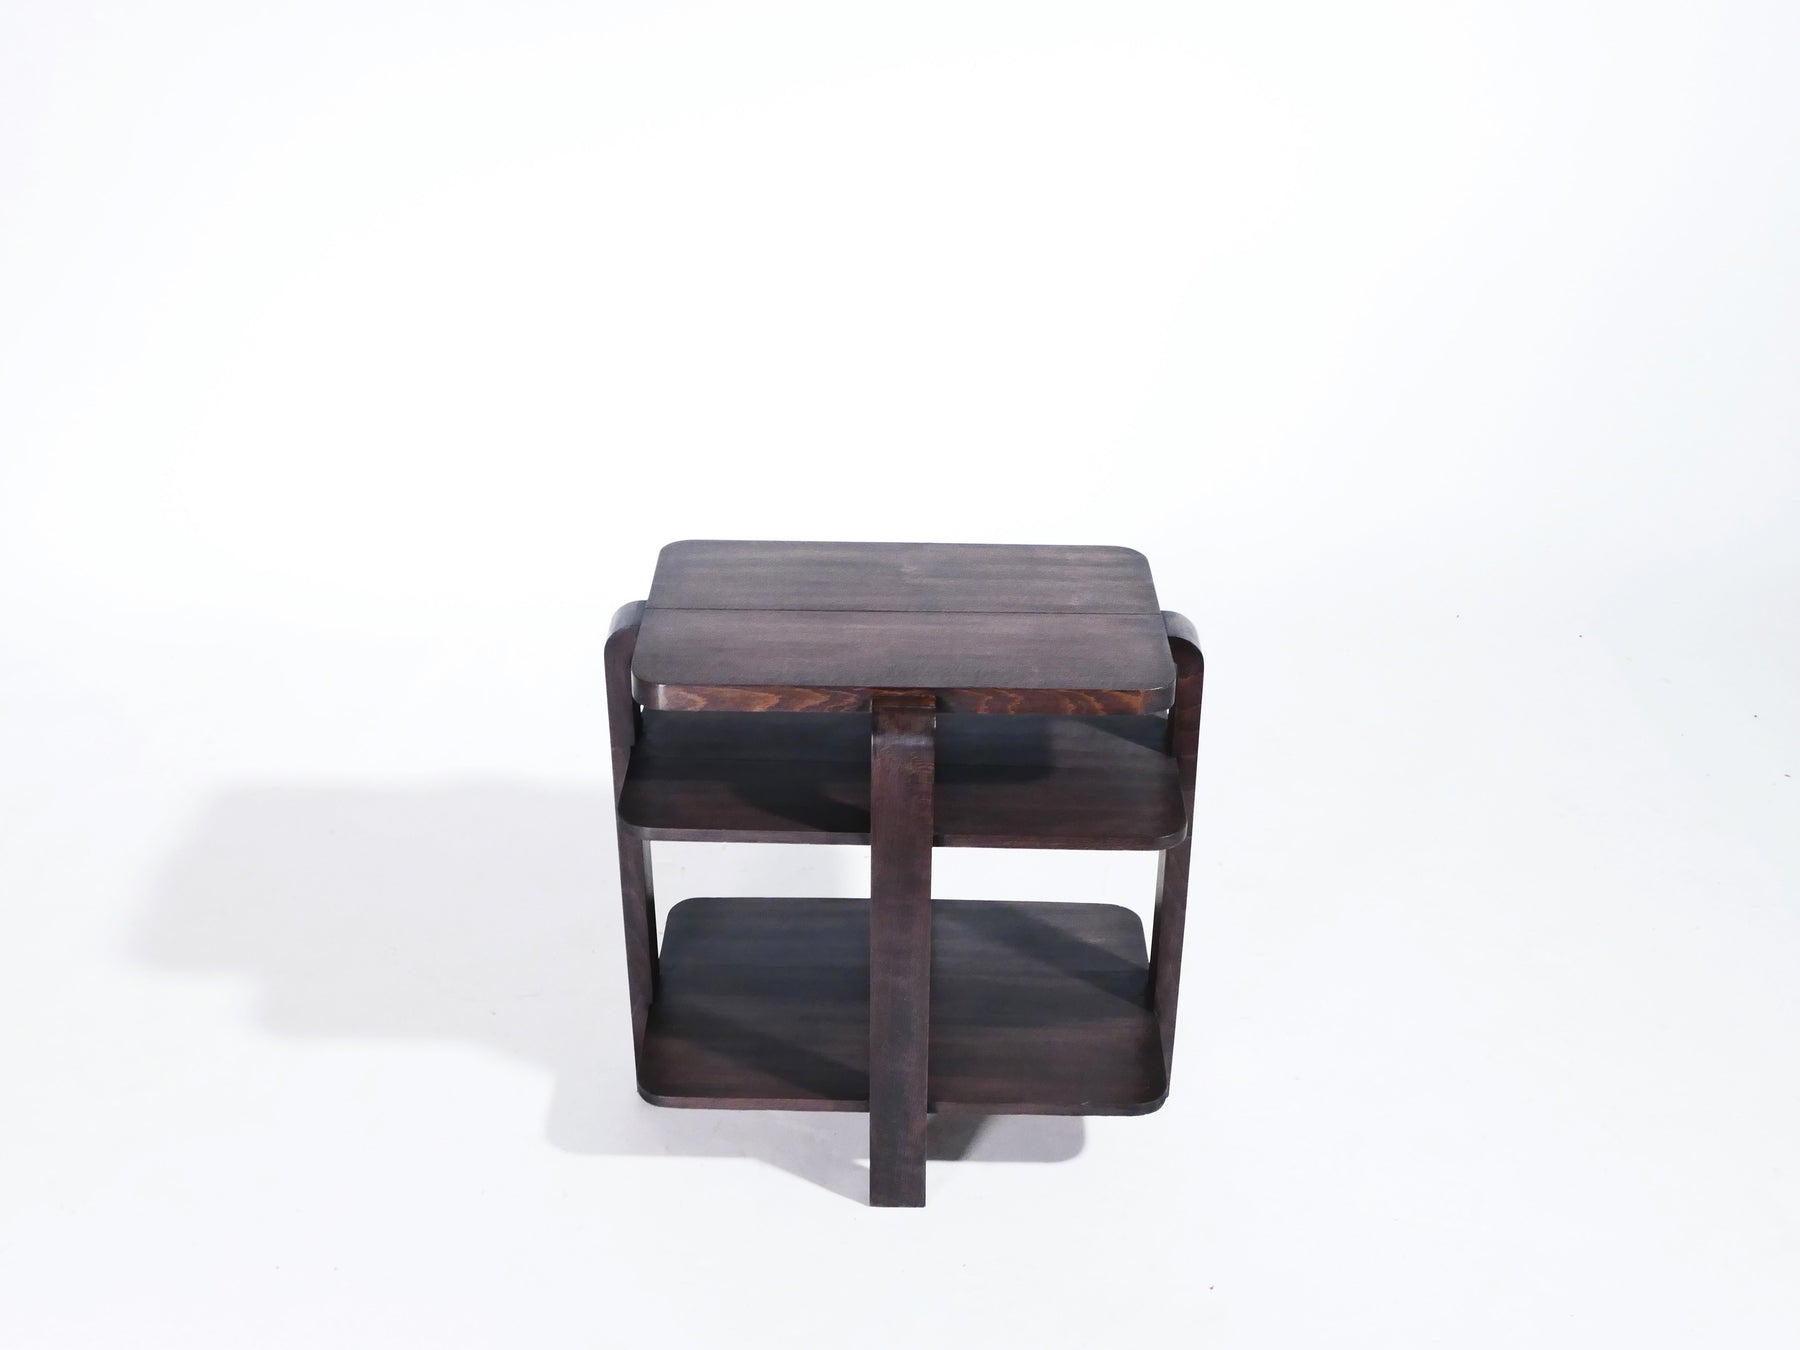 French art deco modernist mahogany side table 1940s